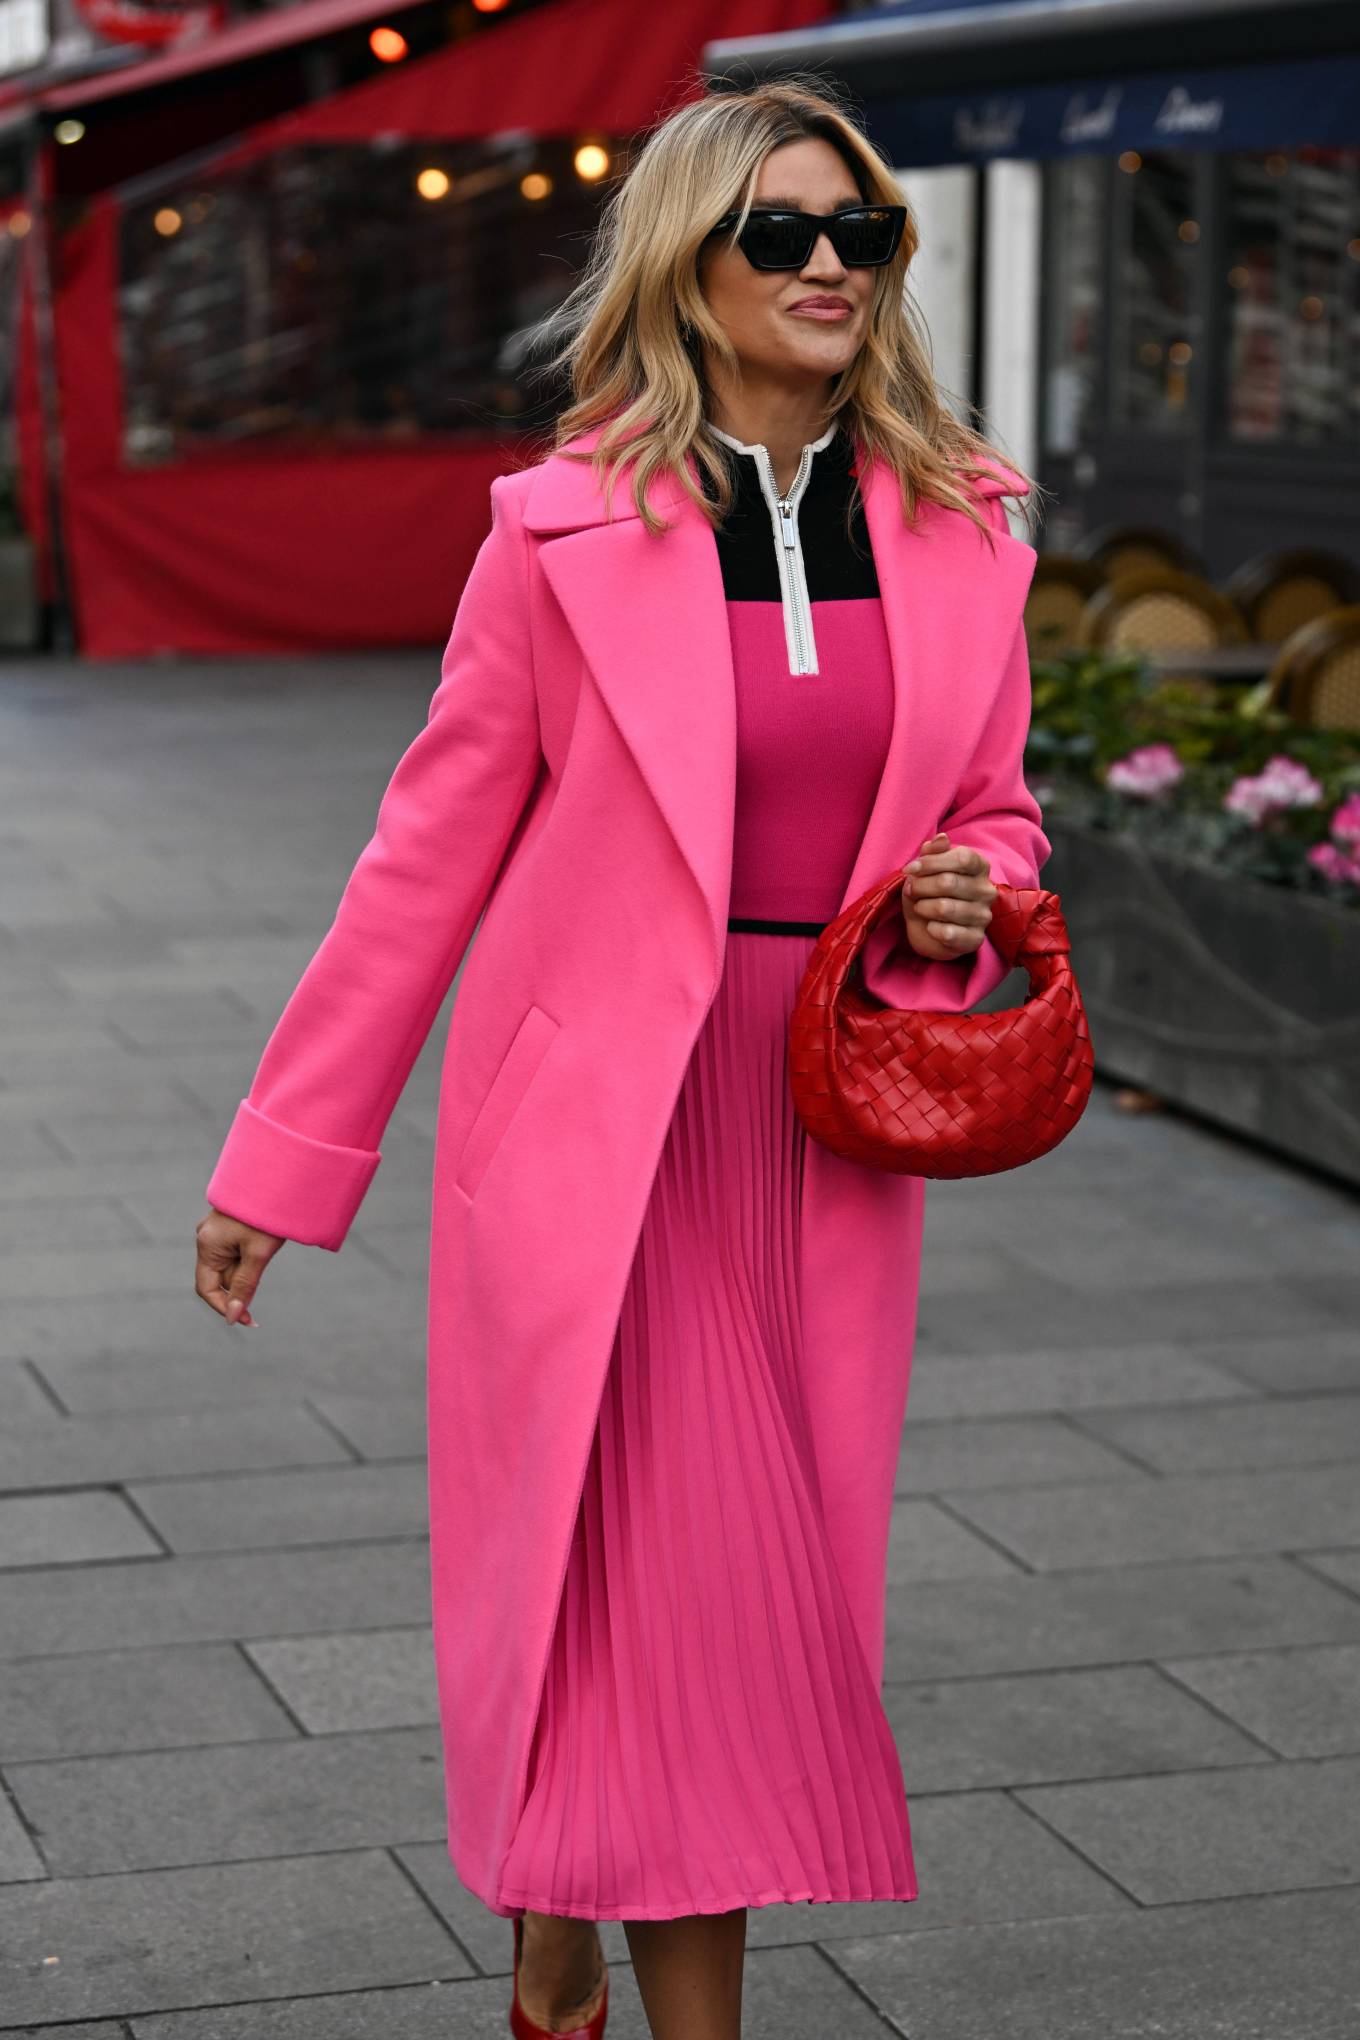 Ashley Roberts - Pictured leaving the Global Radio studios in London